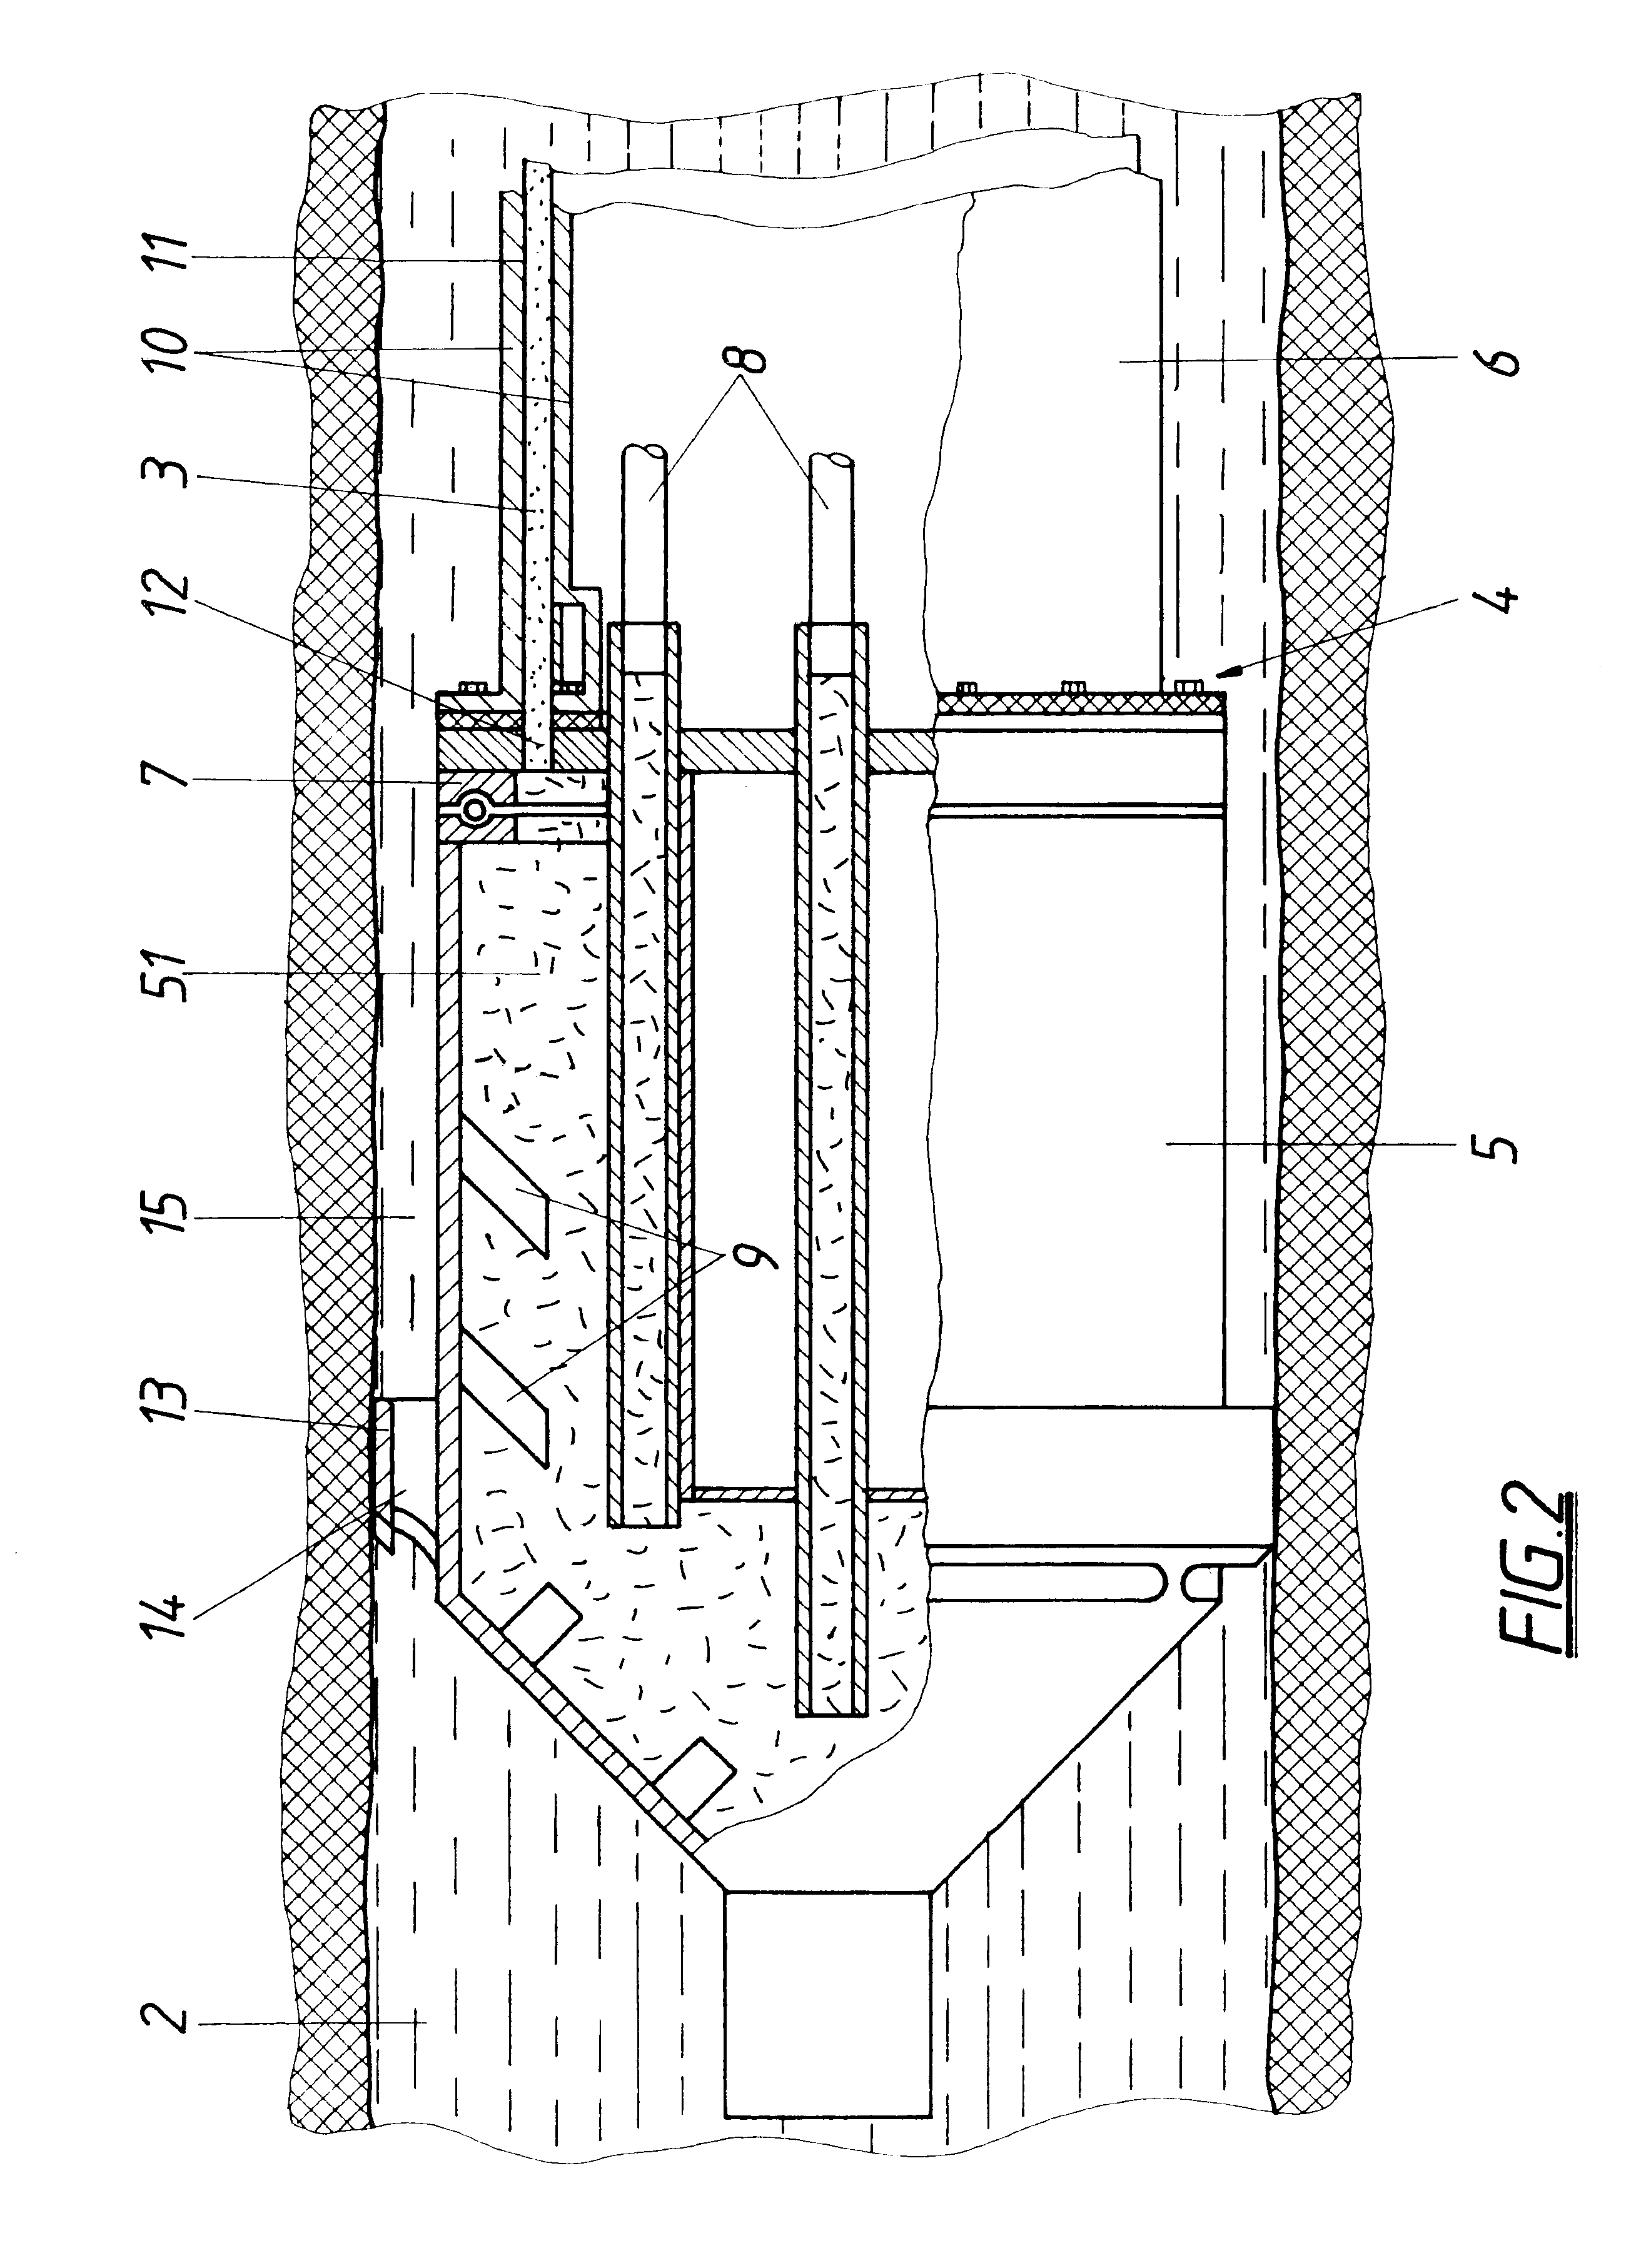 Method and device for laying an underground duct made of a plastic material